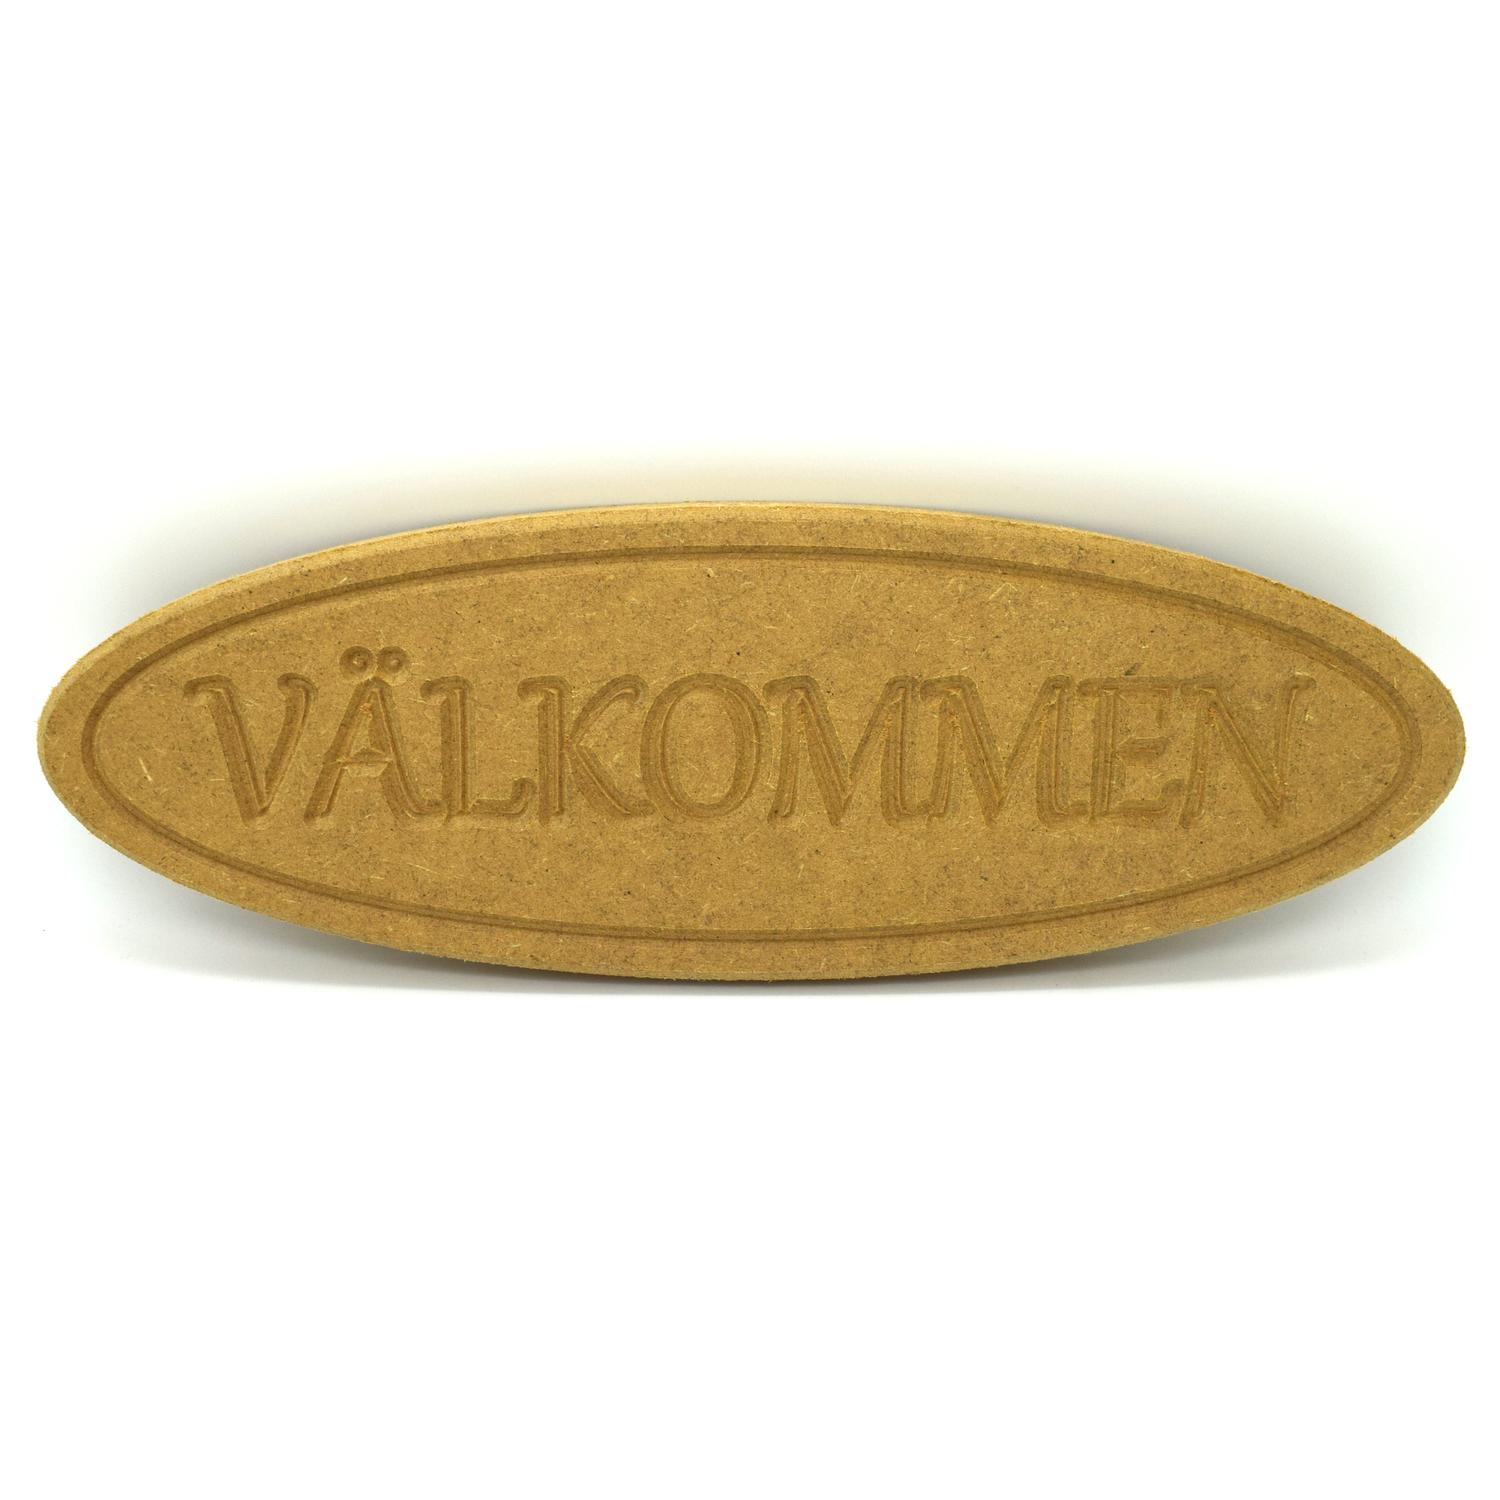 Välkommen Swedish welcome wooden sign with hanging kit